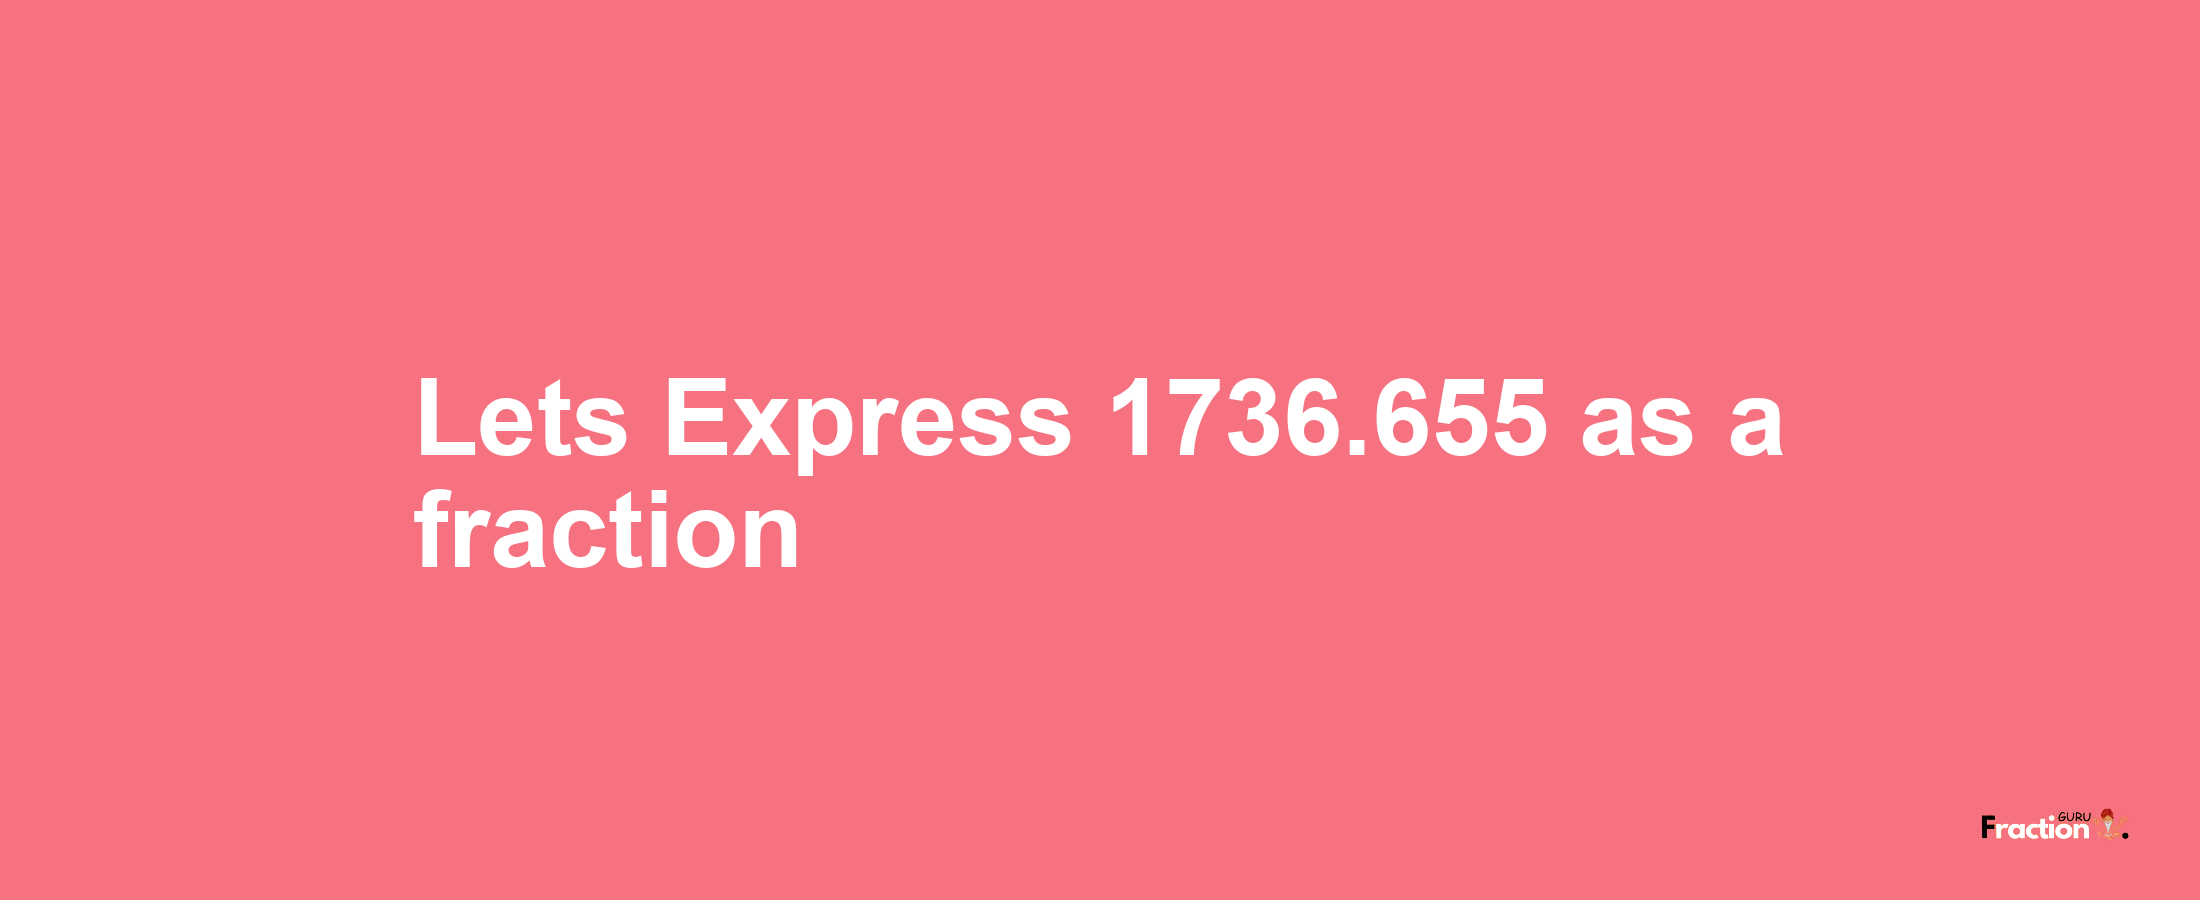 Lets Express 1736.655 as afraction